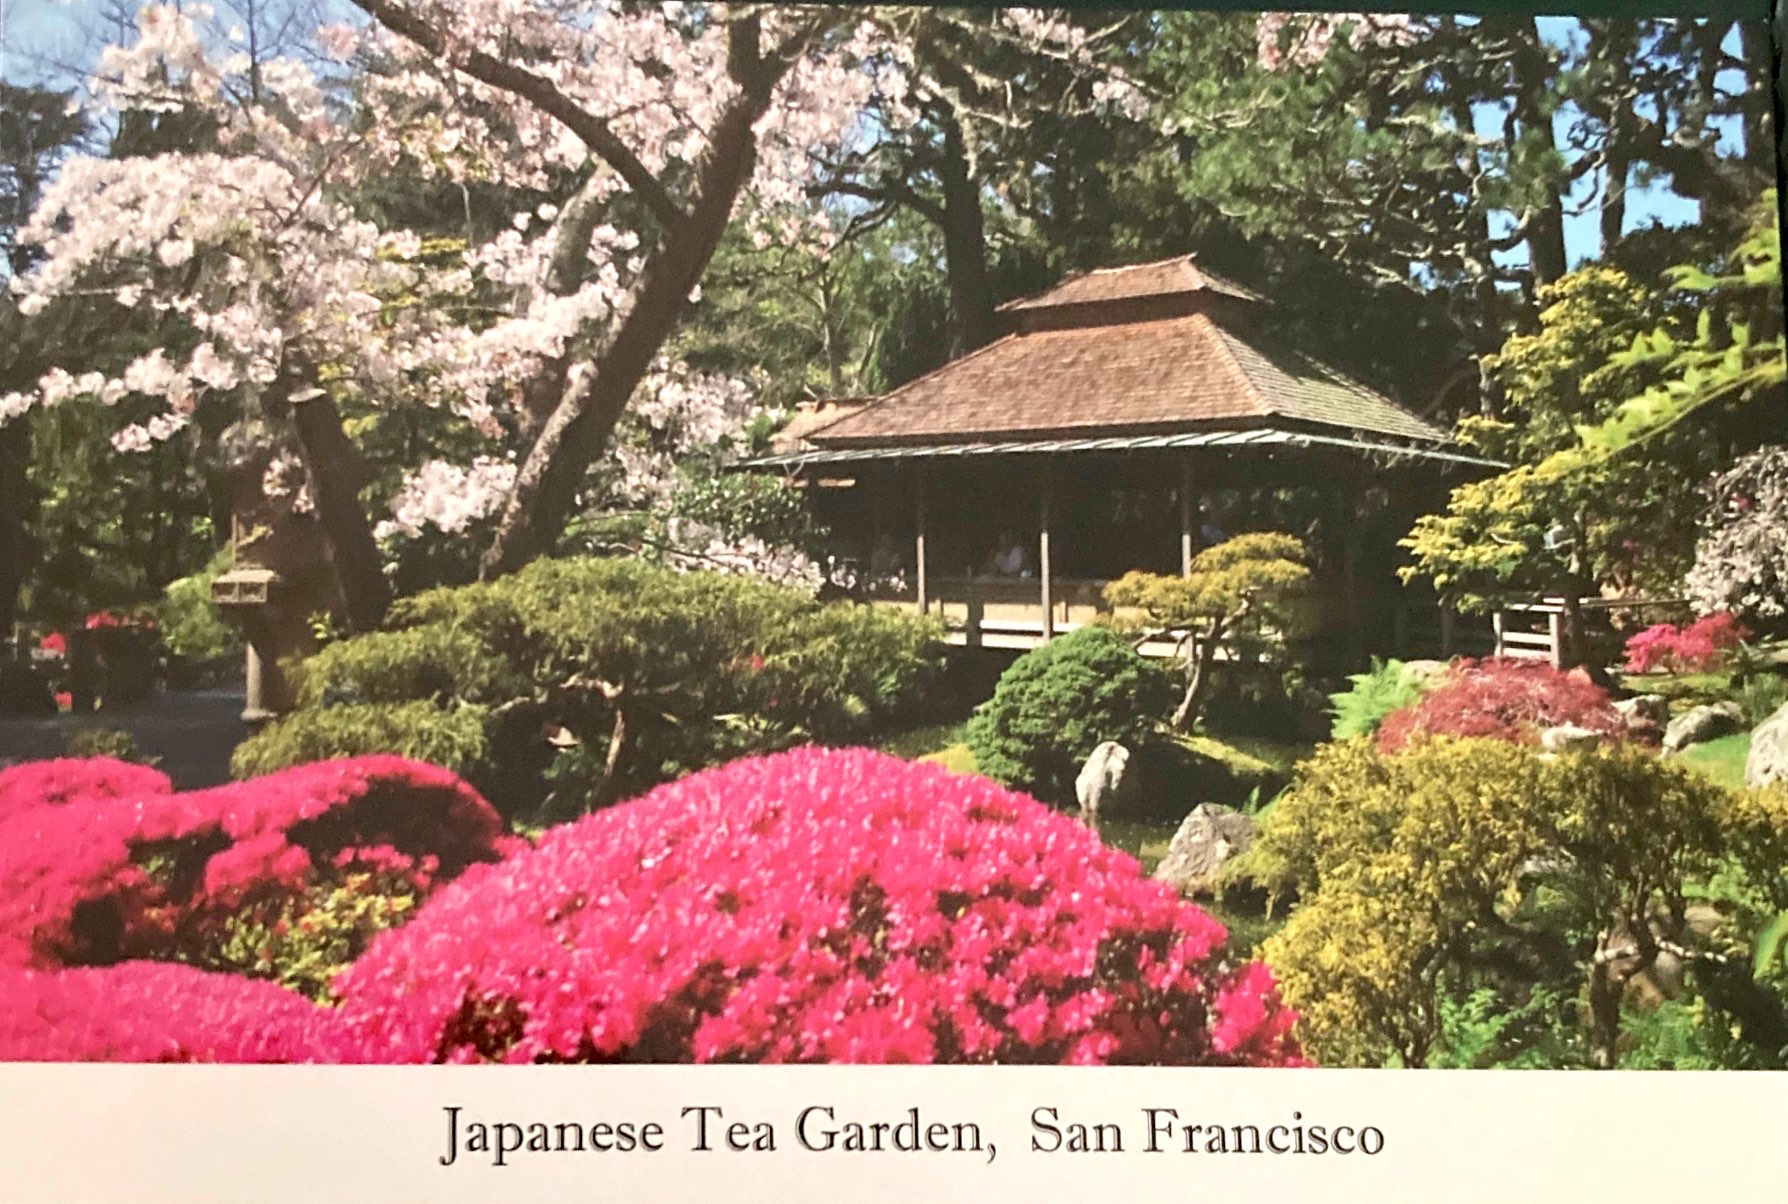 another view of the San Fracisco tea garden, with lots of flowers